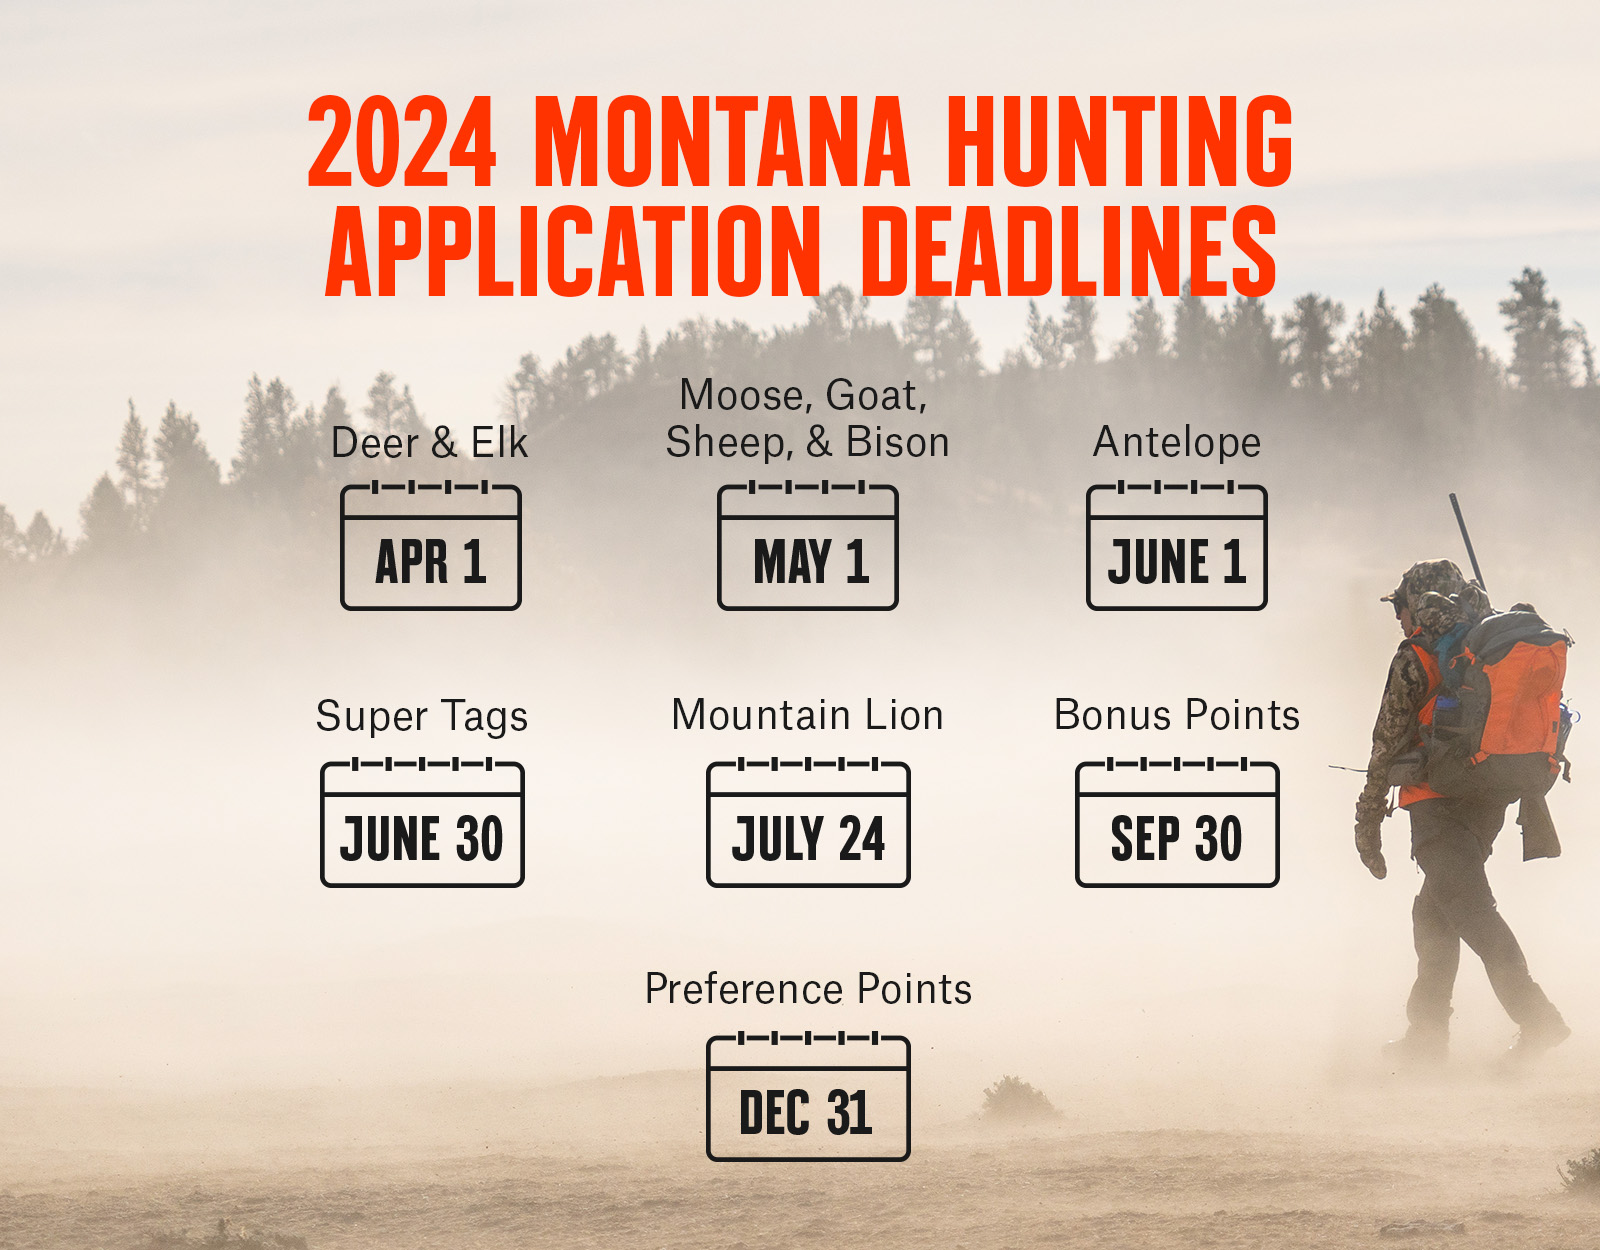 Infographic showing 2024 Montana Hunting Application deadlines. 